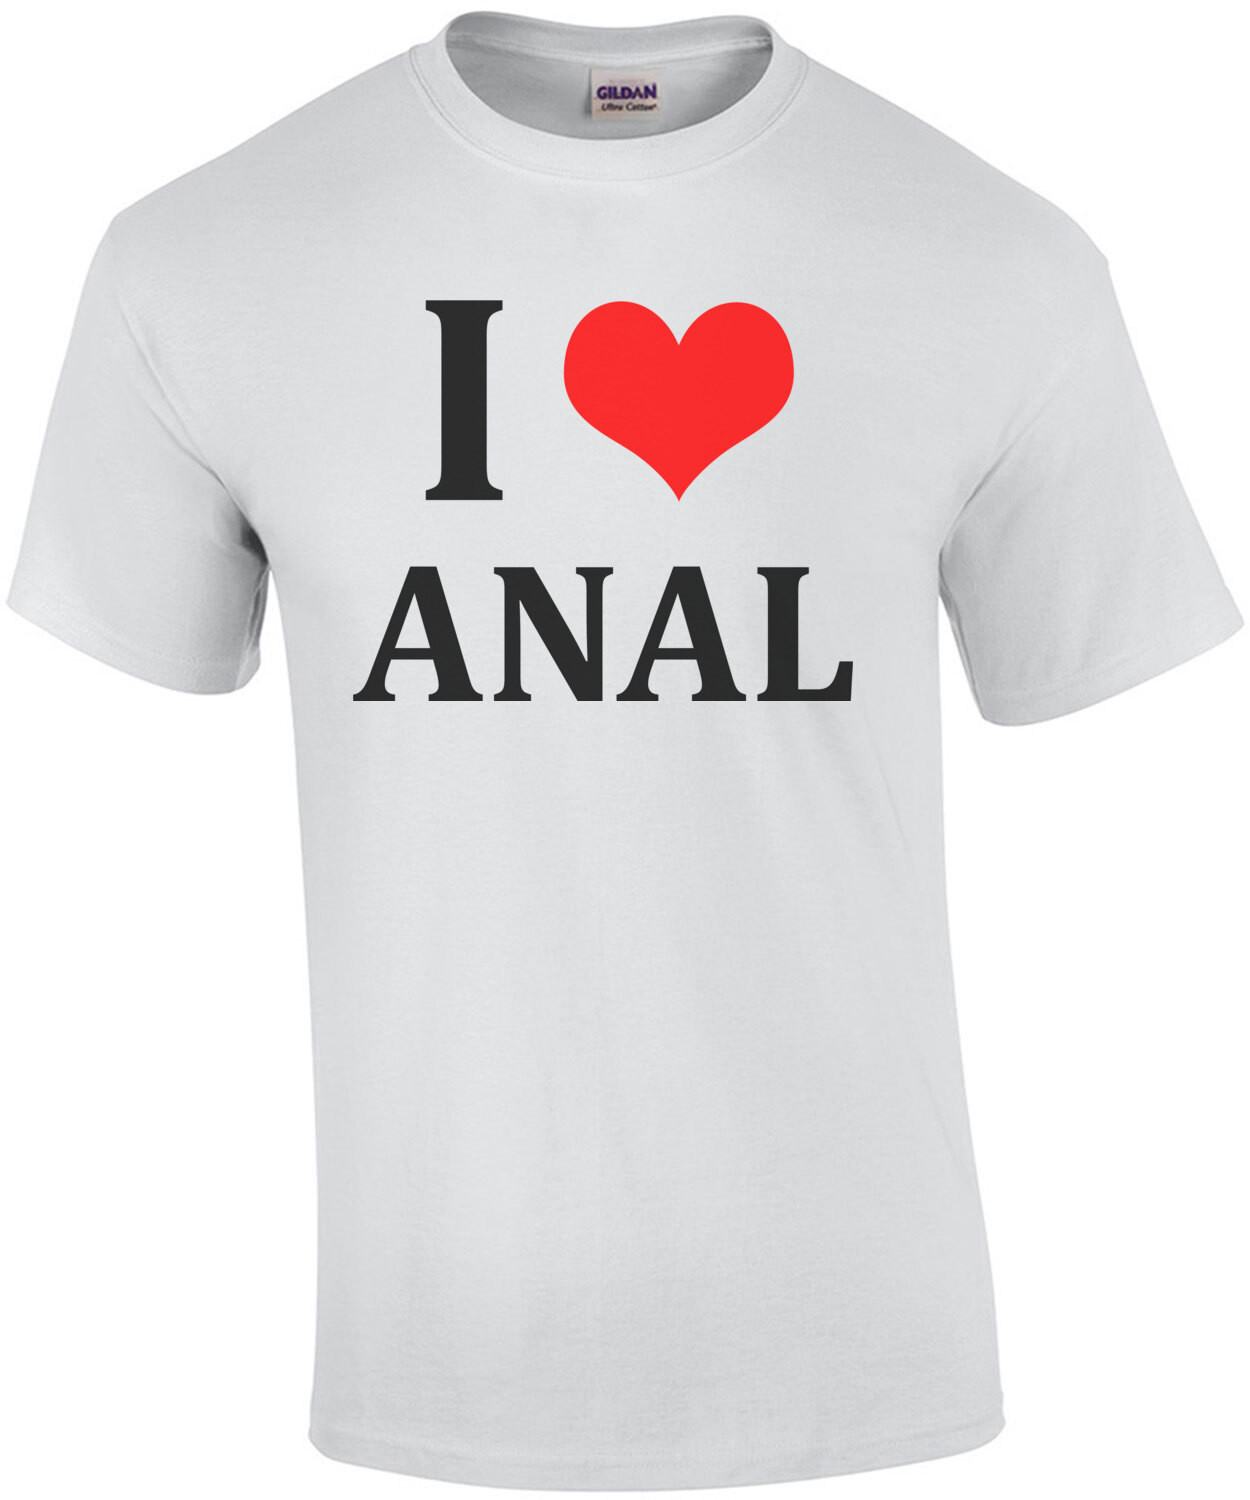 I love anal - funny offensive sexual t-shirt